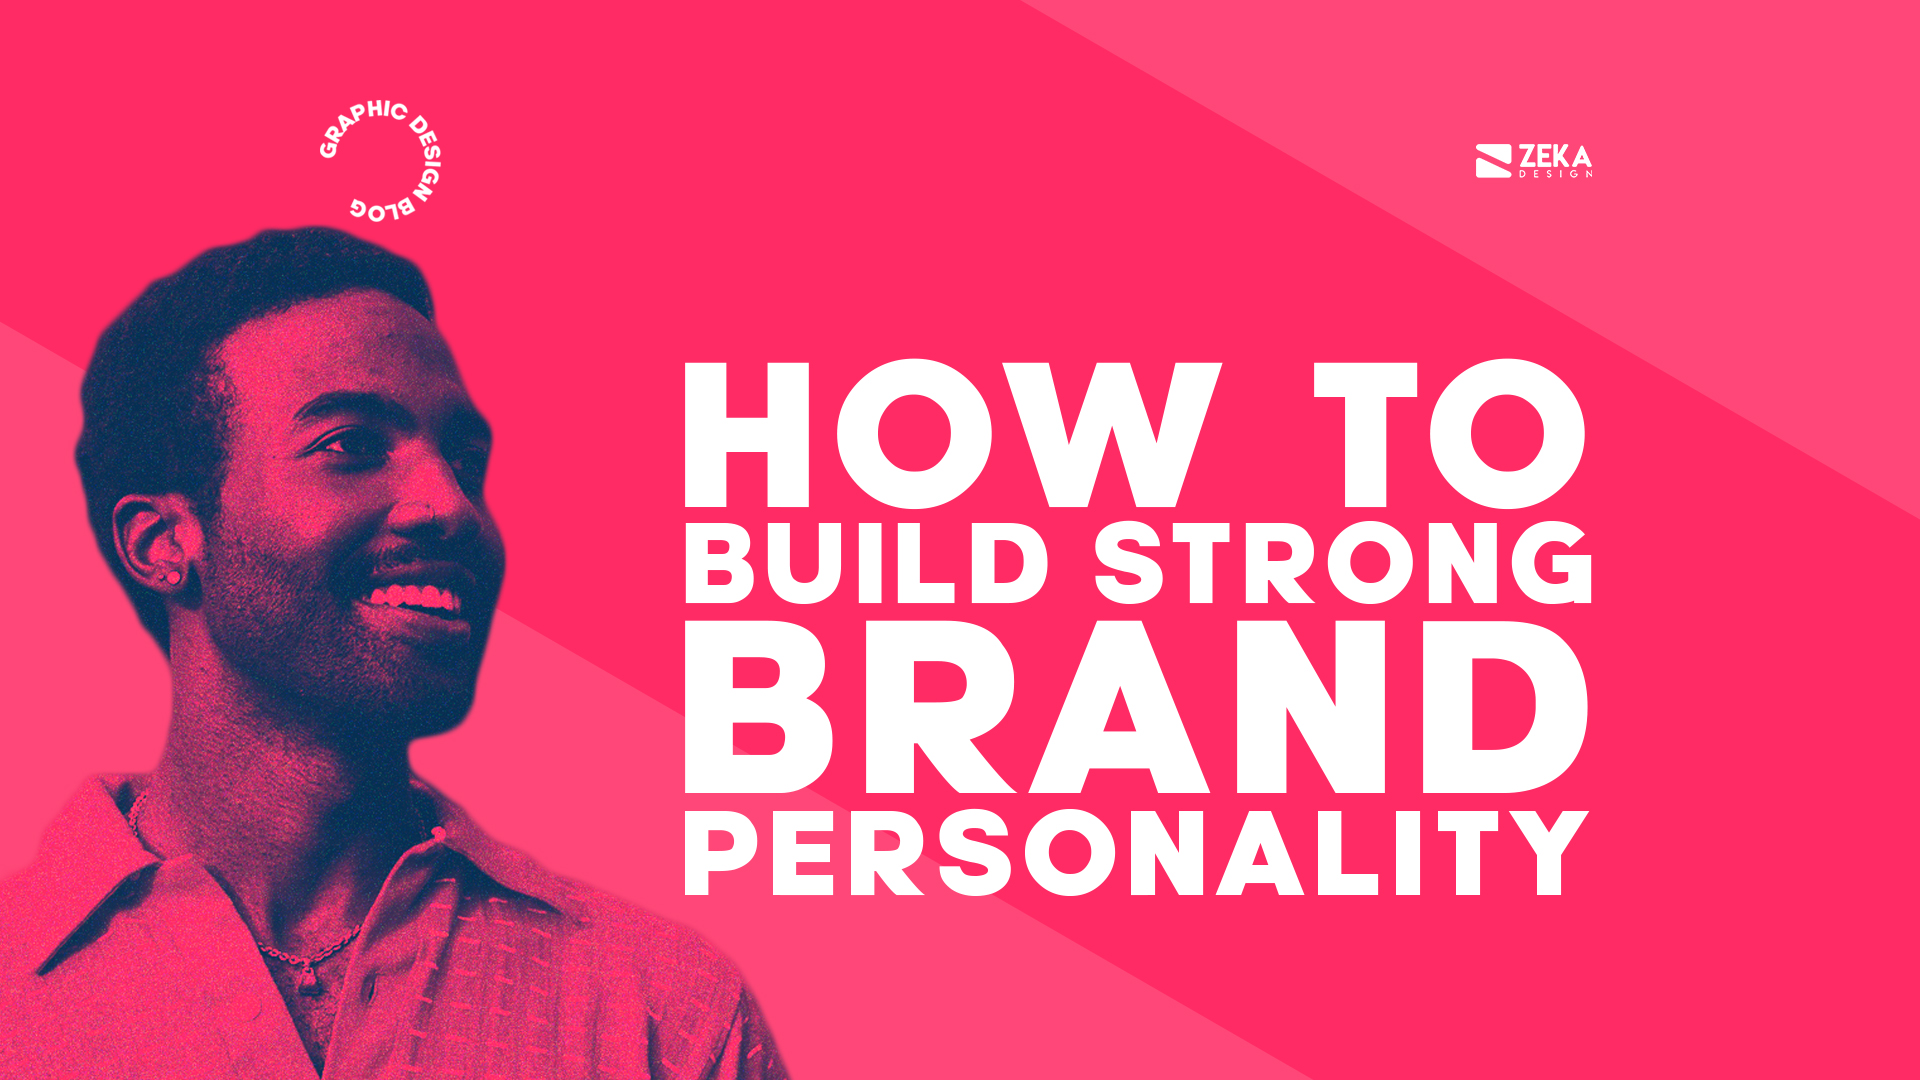 https://www.zekagraphic.com/wp-content/uploads/2021/03/How-To-Build-Strong-Brand-Personality-Guide.jpg